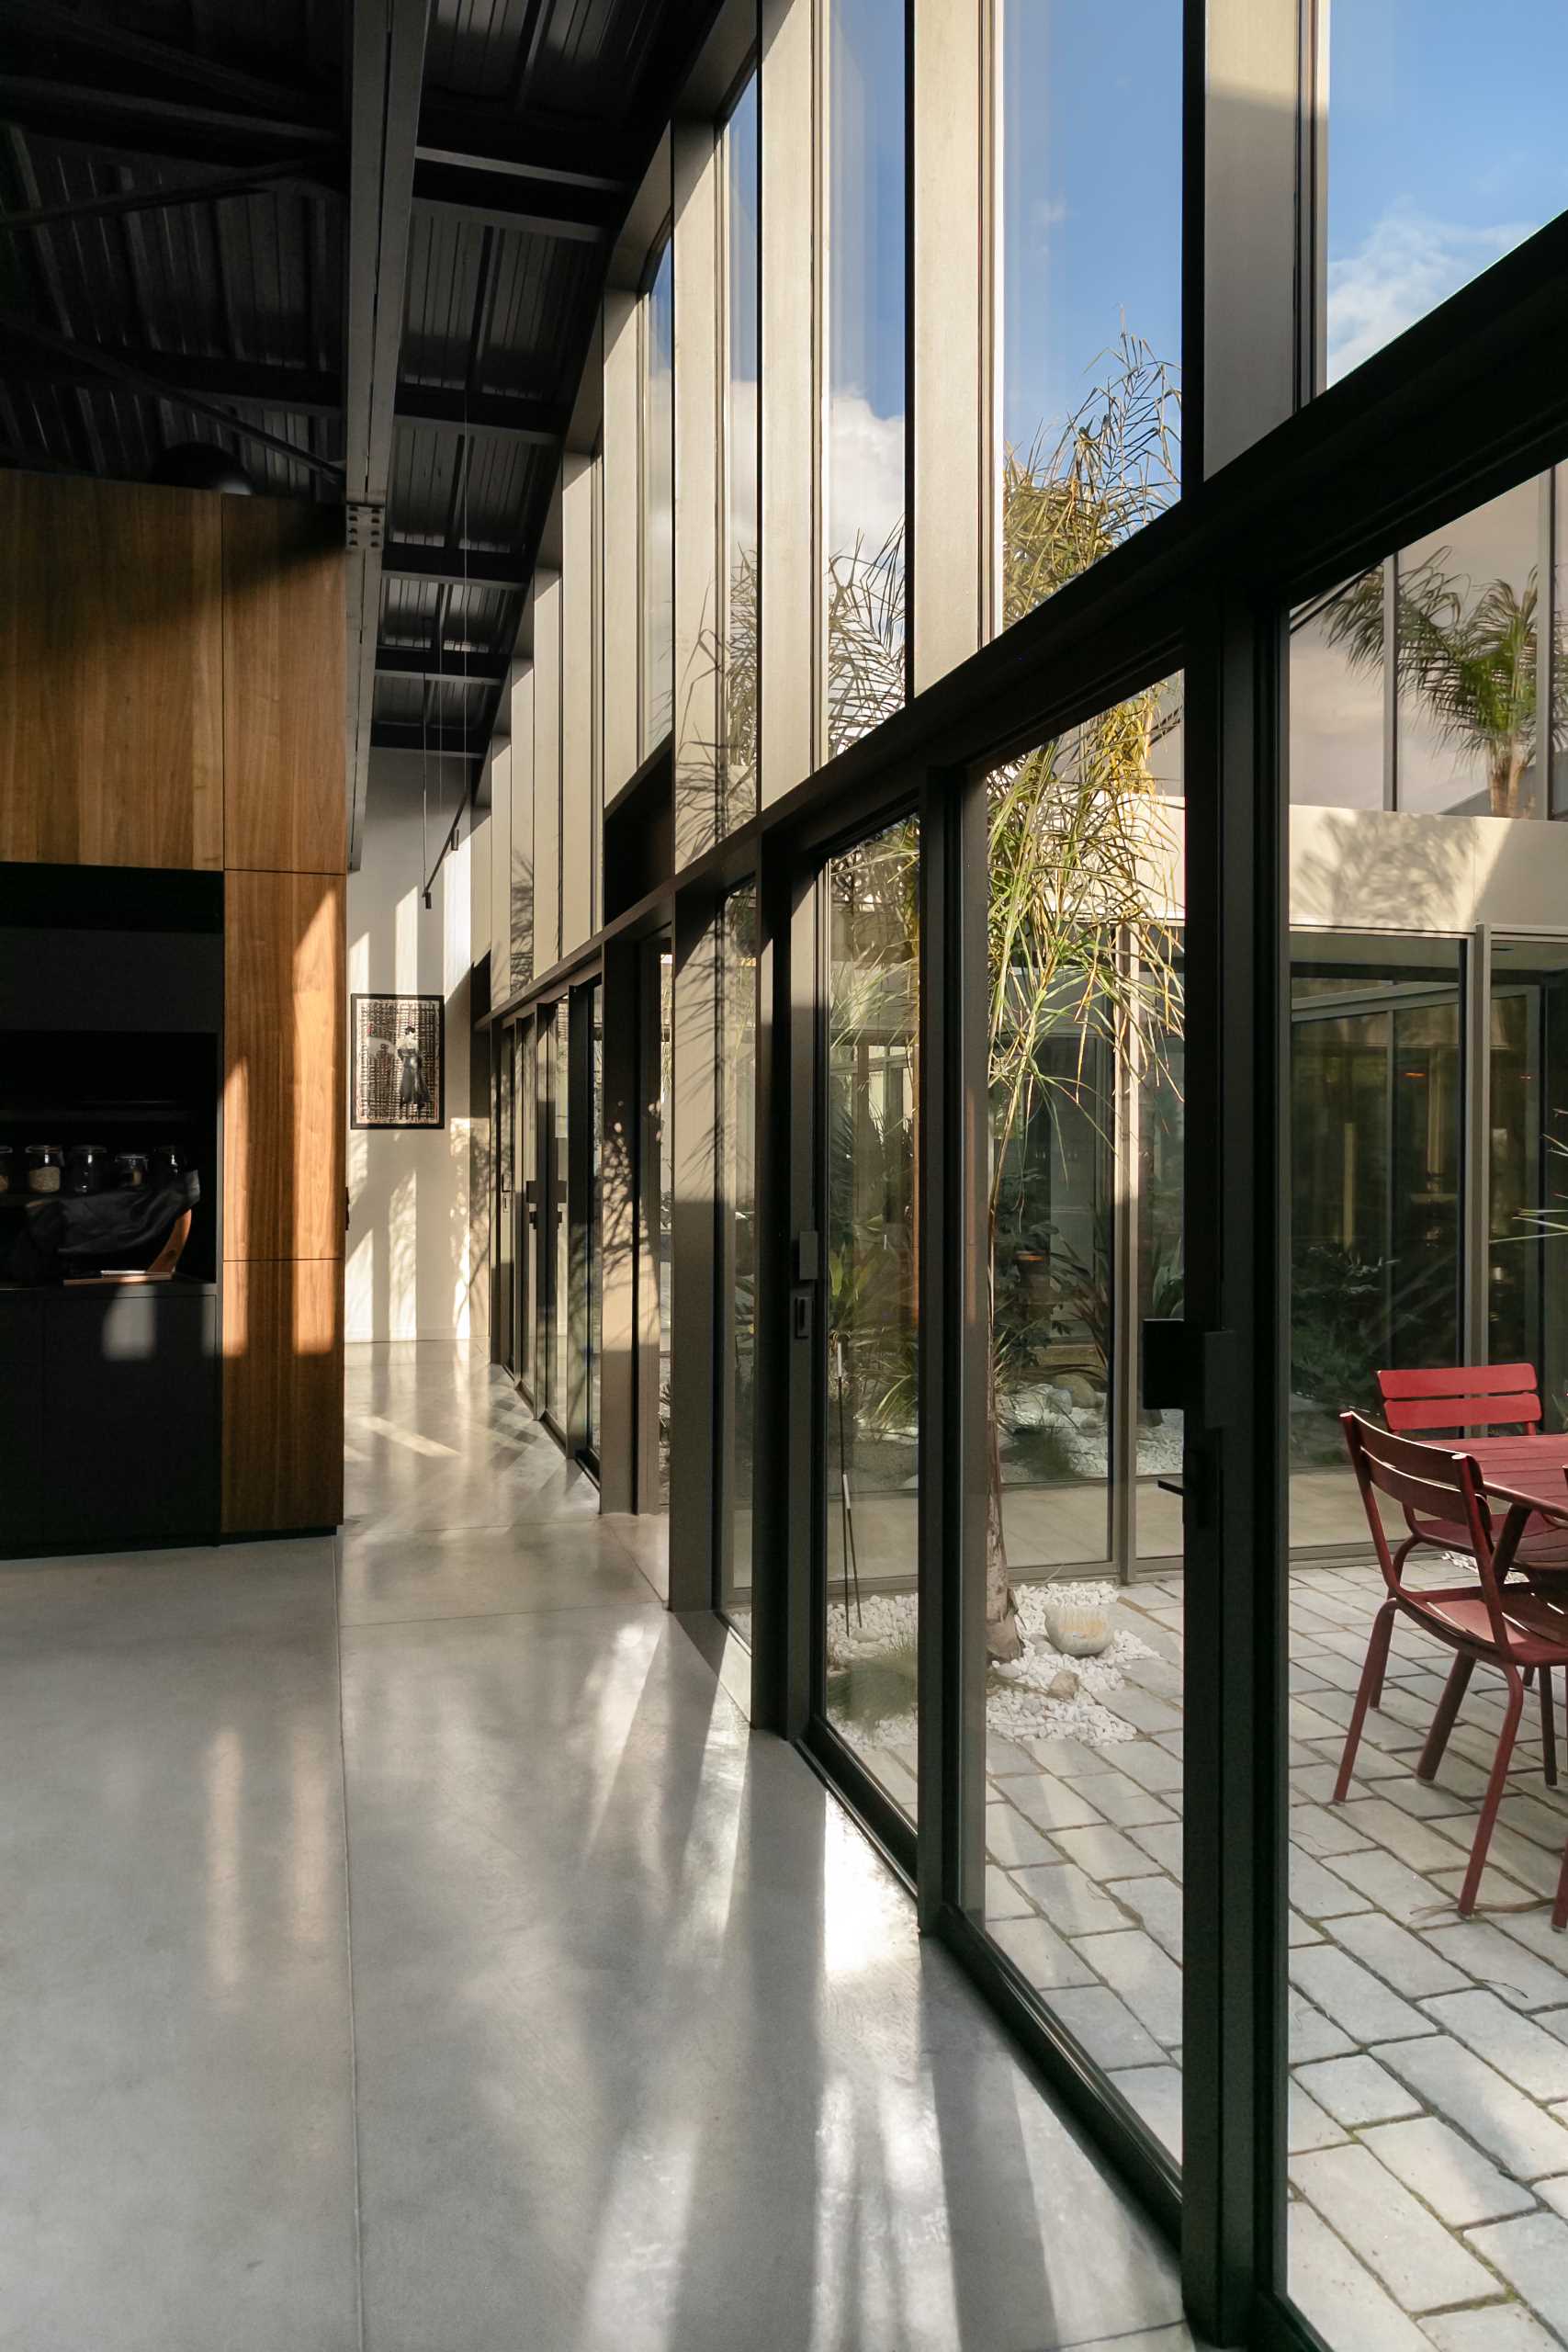 Throughout this modern warehouse conversion, walls of windows flood the interior with natural light, brightening the dark elements, while polished concrete flooring retains the industrial look.